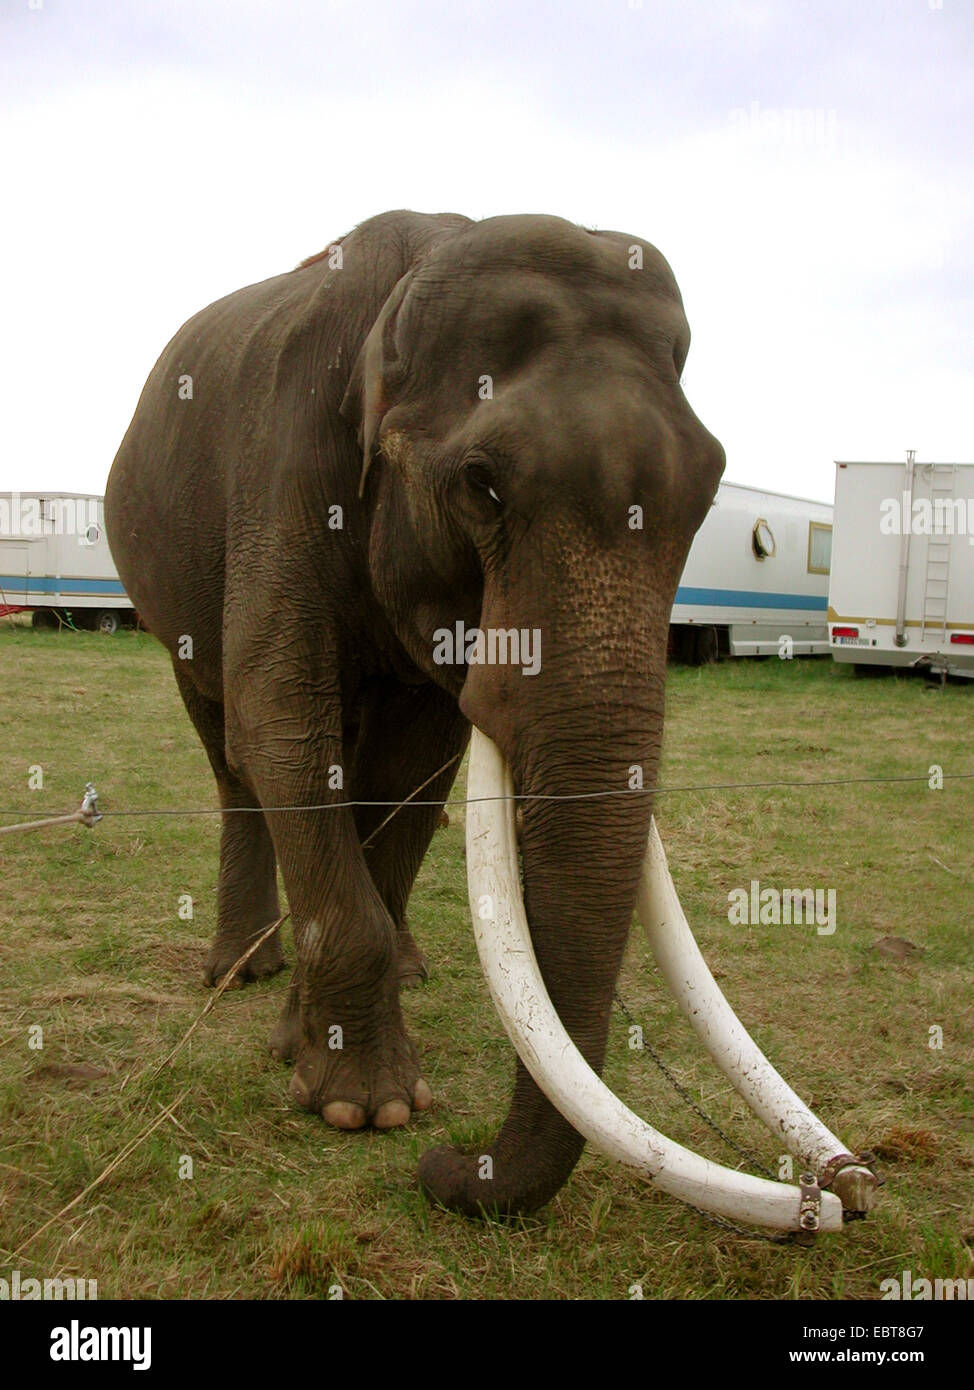 Indian elephant (Elephas maximus indicus, Elephas maximus bengalensis), circus animal: In Germany hundreds of wild animals are kept although a species-appropriate keeping is impossible in travelling enterprises. In Austria wild animal keeping is already prohibited., Germany, Stock Photo